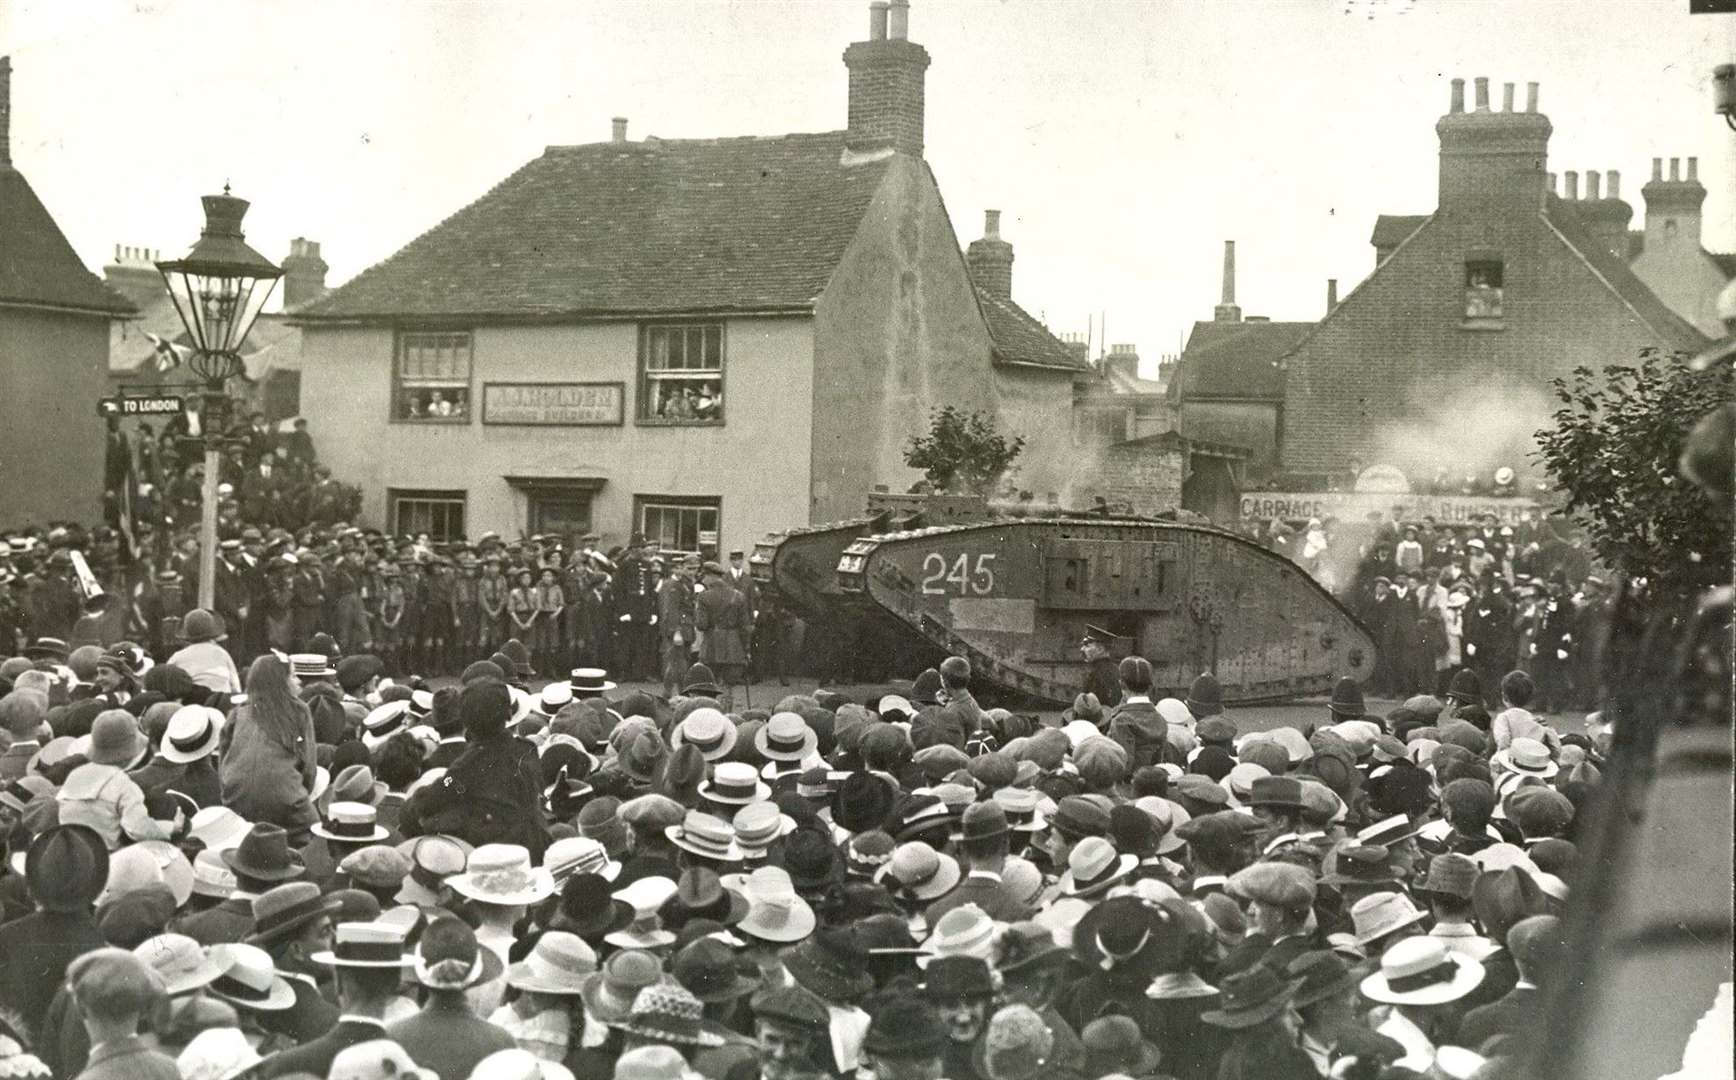 The tank was installed in 1919 following the financial contributions made by the town